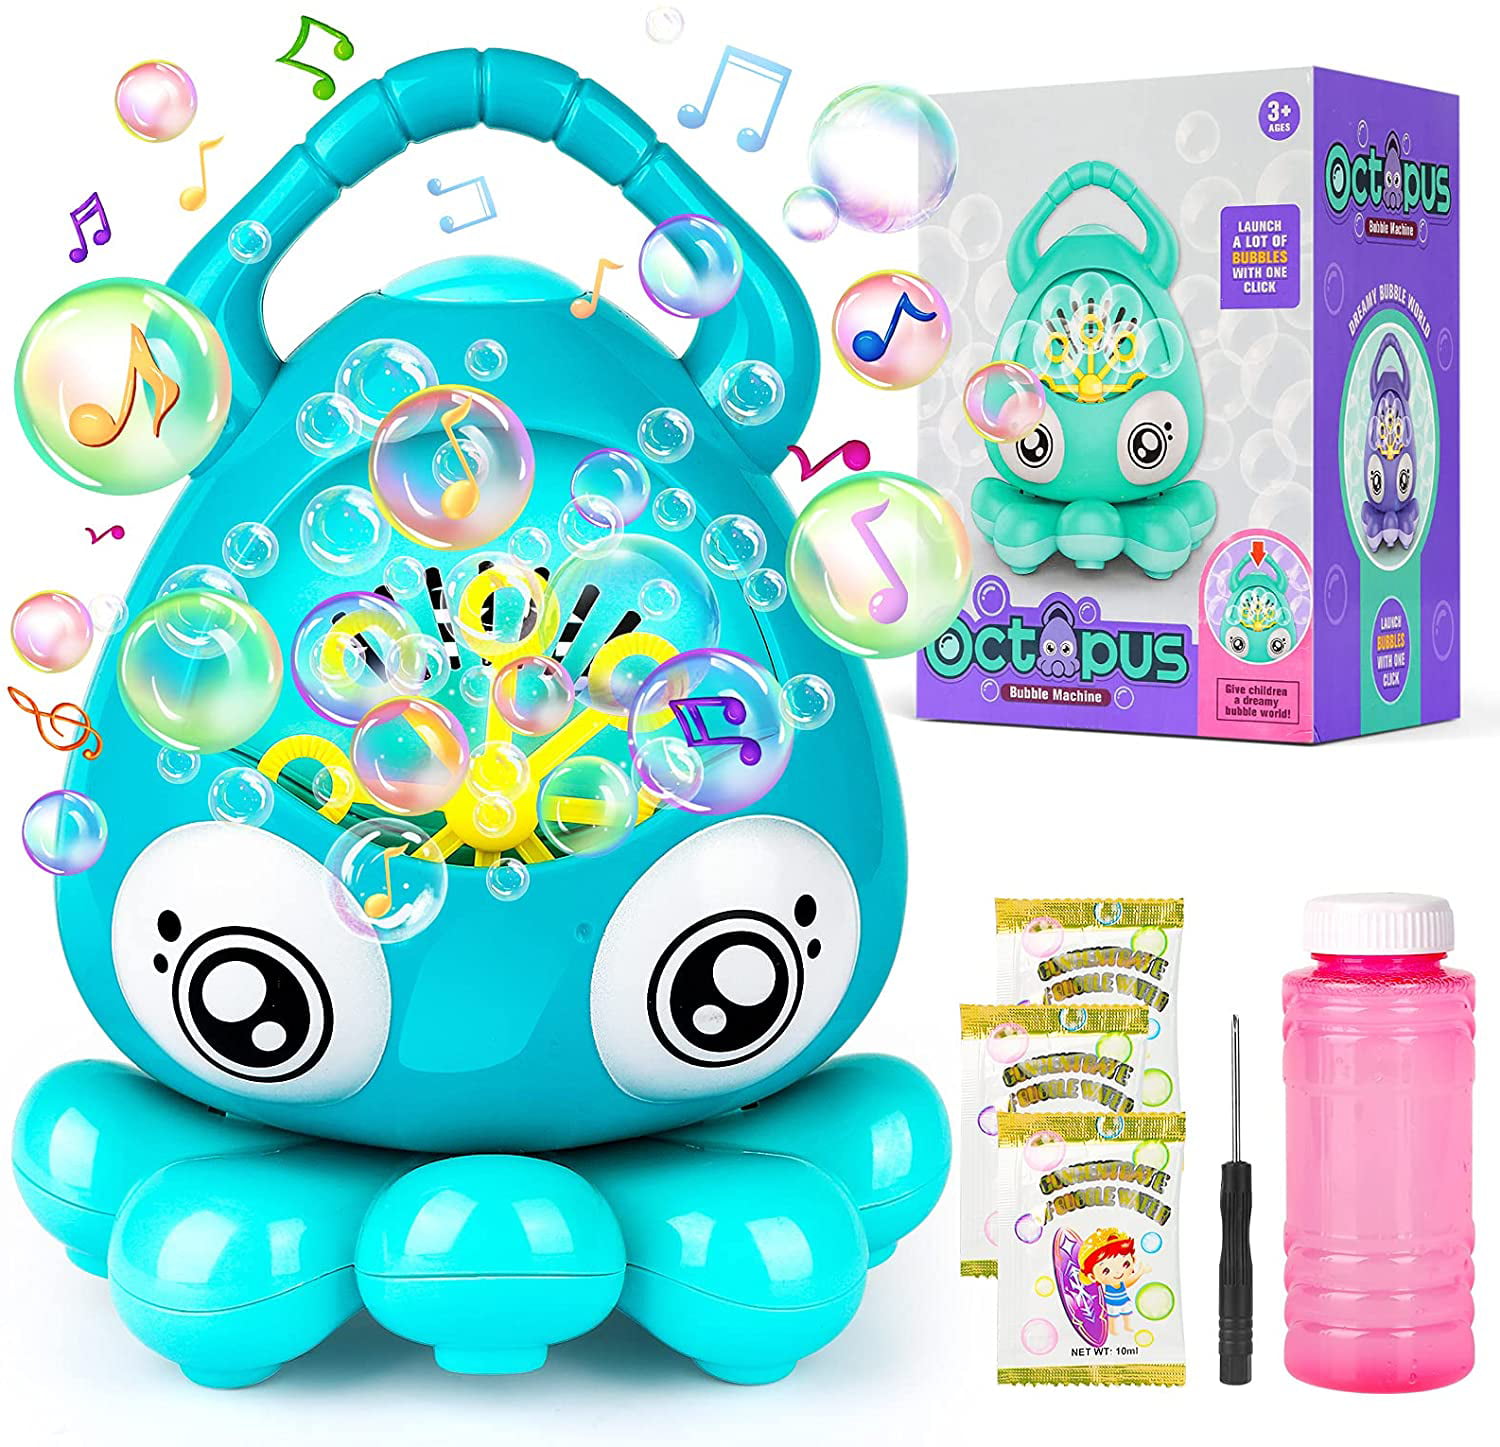 Wedding Outdoor Indoor Games Automatic Bubble Blower with Bubble Solution Portable Bubble Maker Toy Gift for Children Birthday Party Betheaces Bubble Machine Toys for Kids Toddlers Boys Girls 